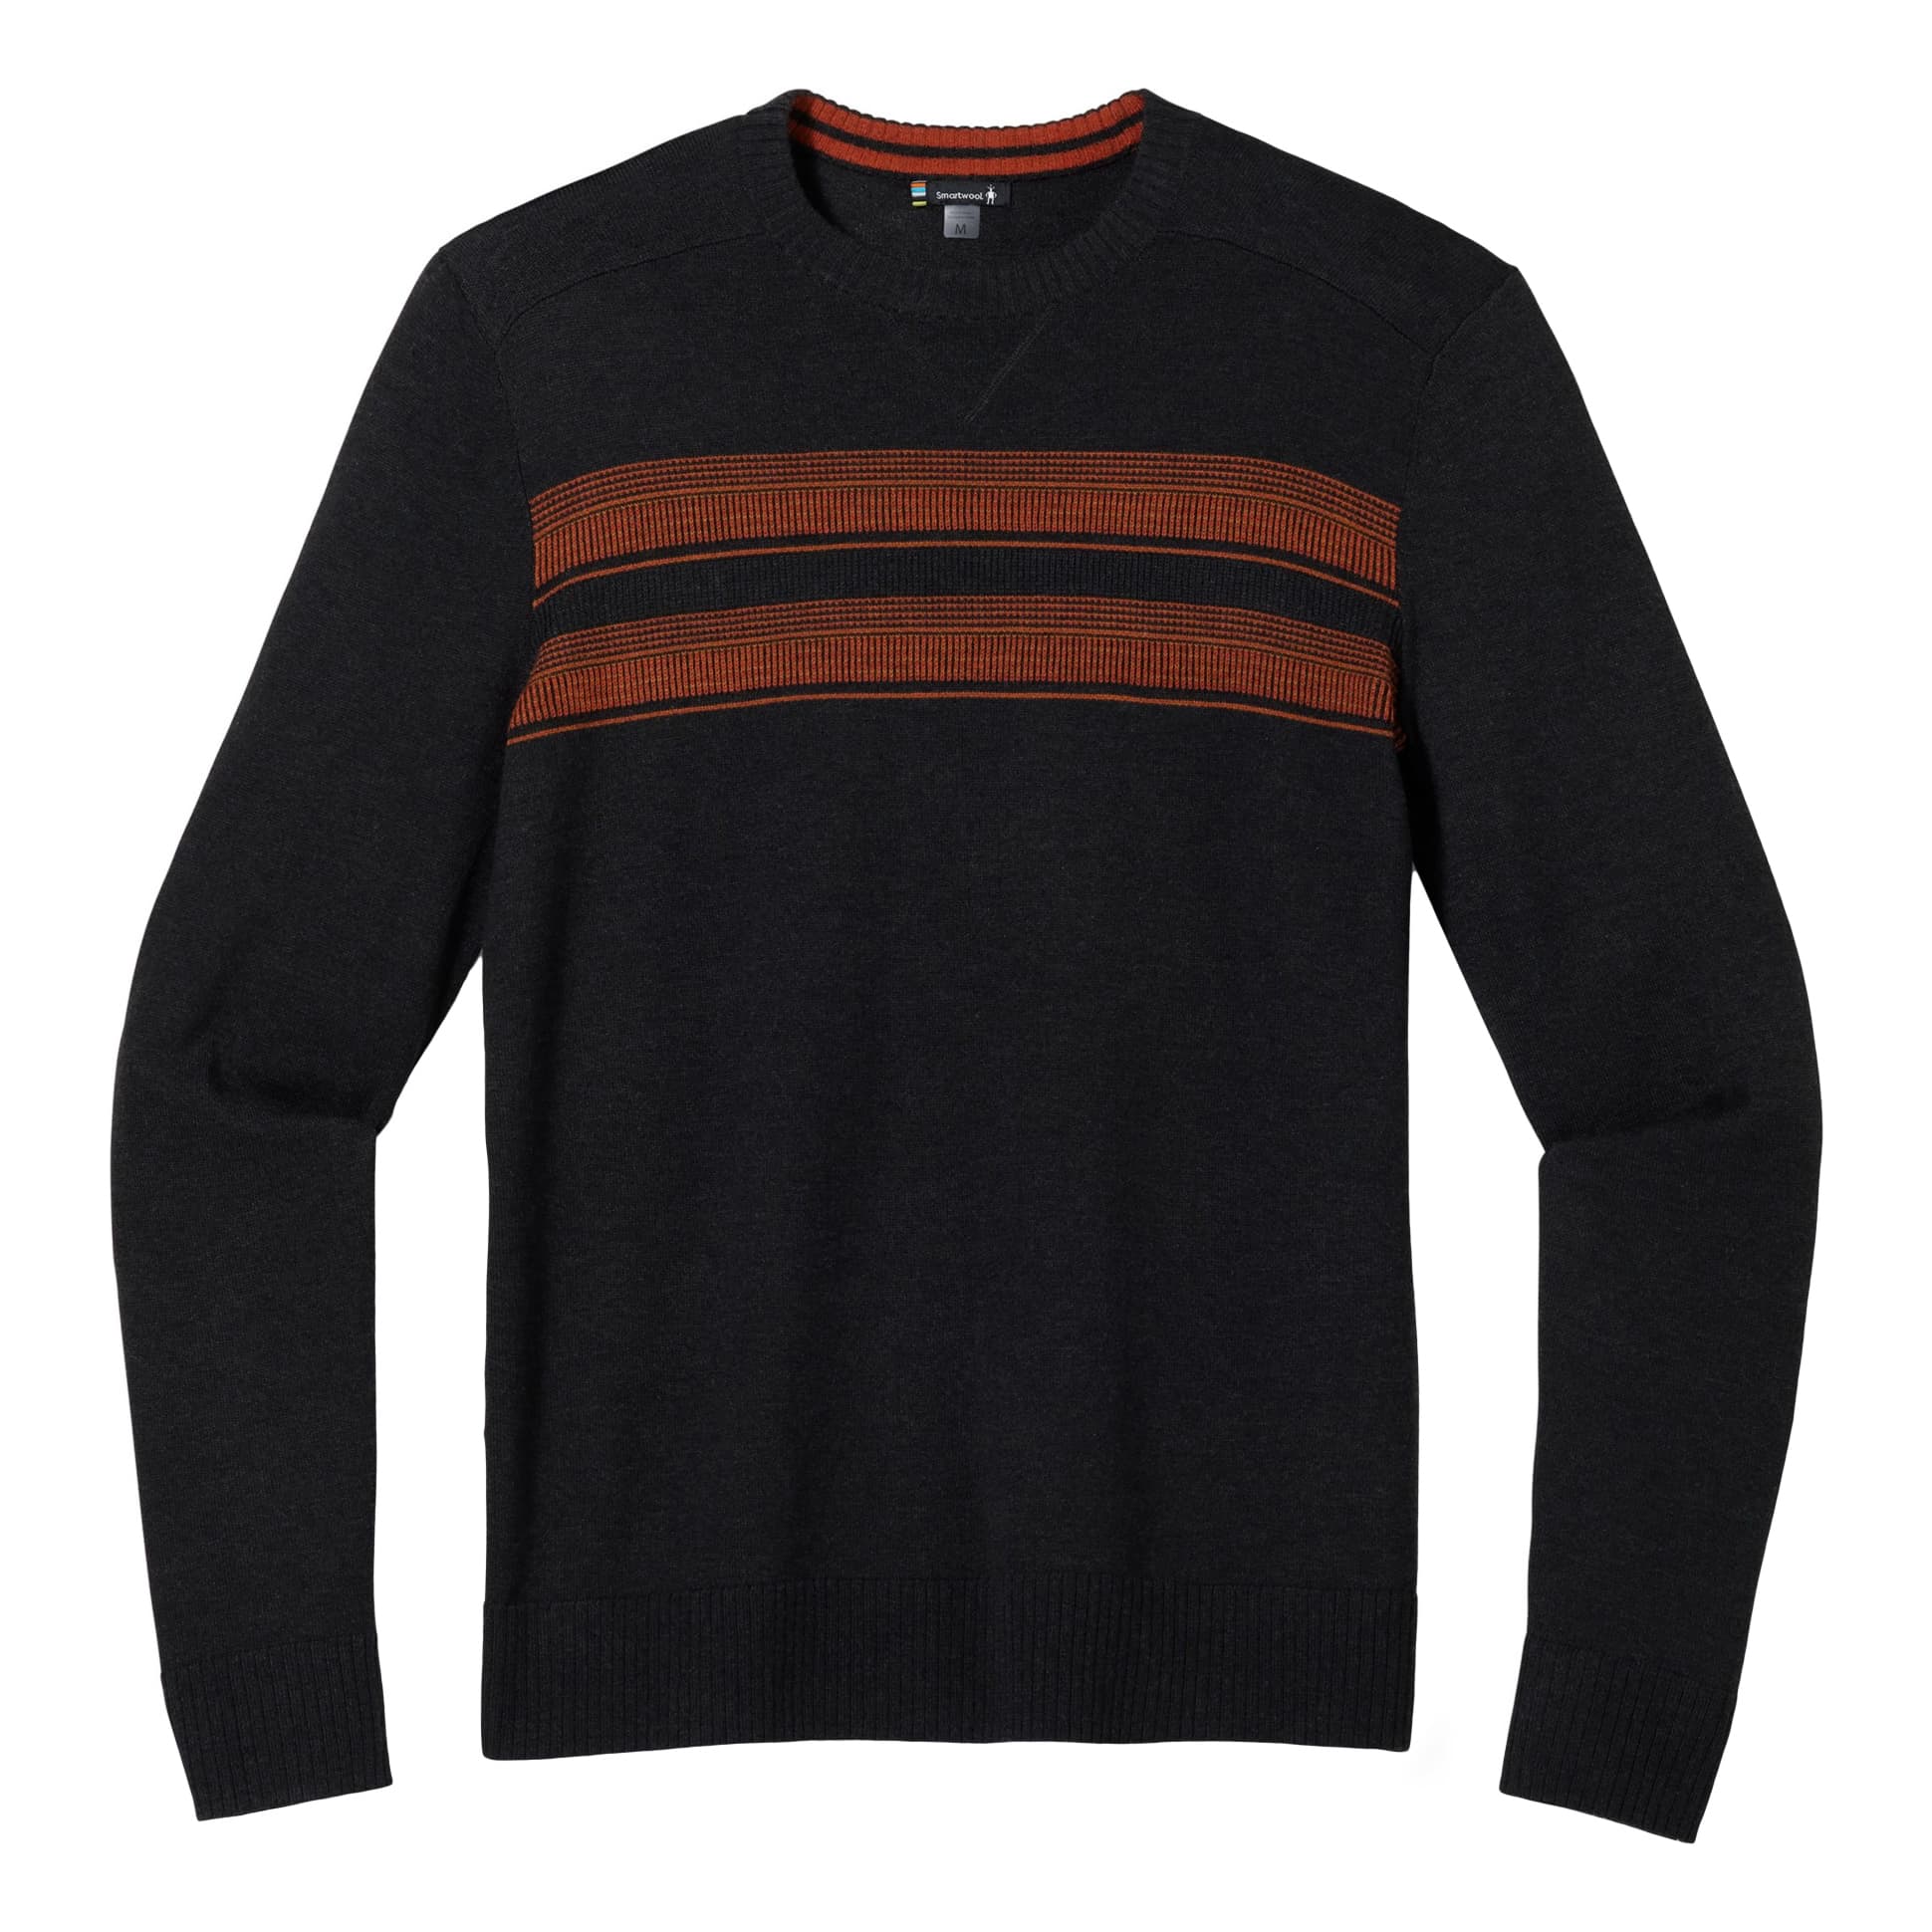 Smartwool® Men’s Sparwood Stripe Crew Sweater - Charcoal Heather/Picante